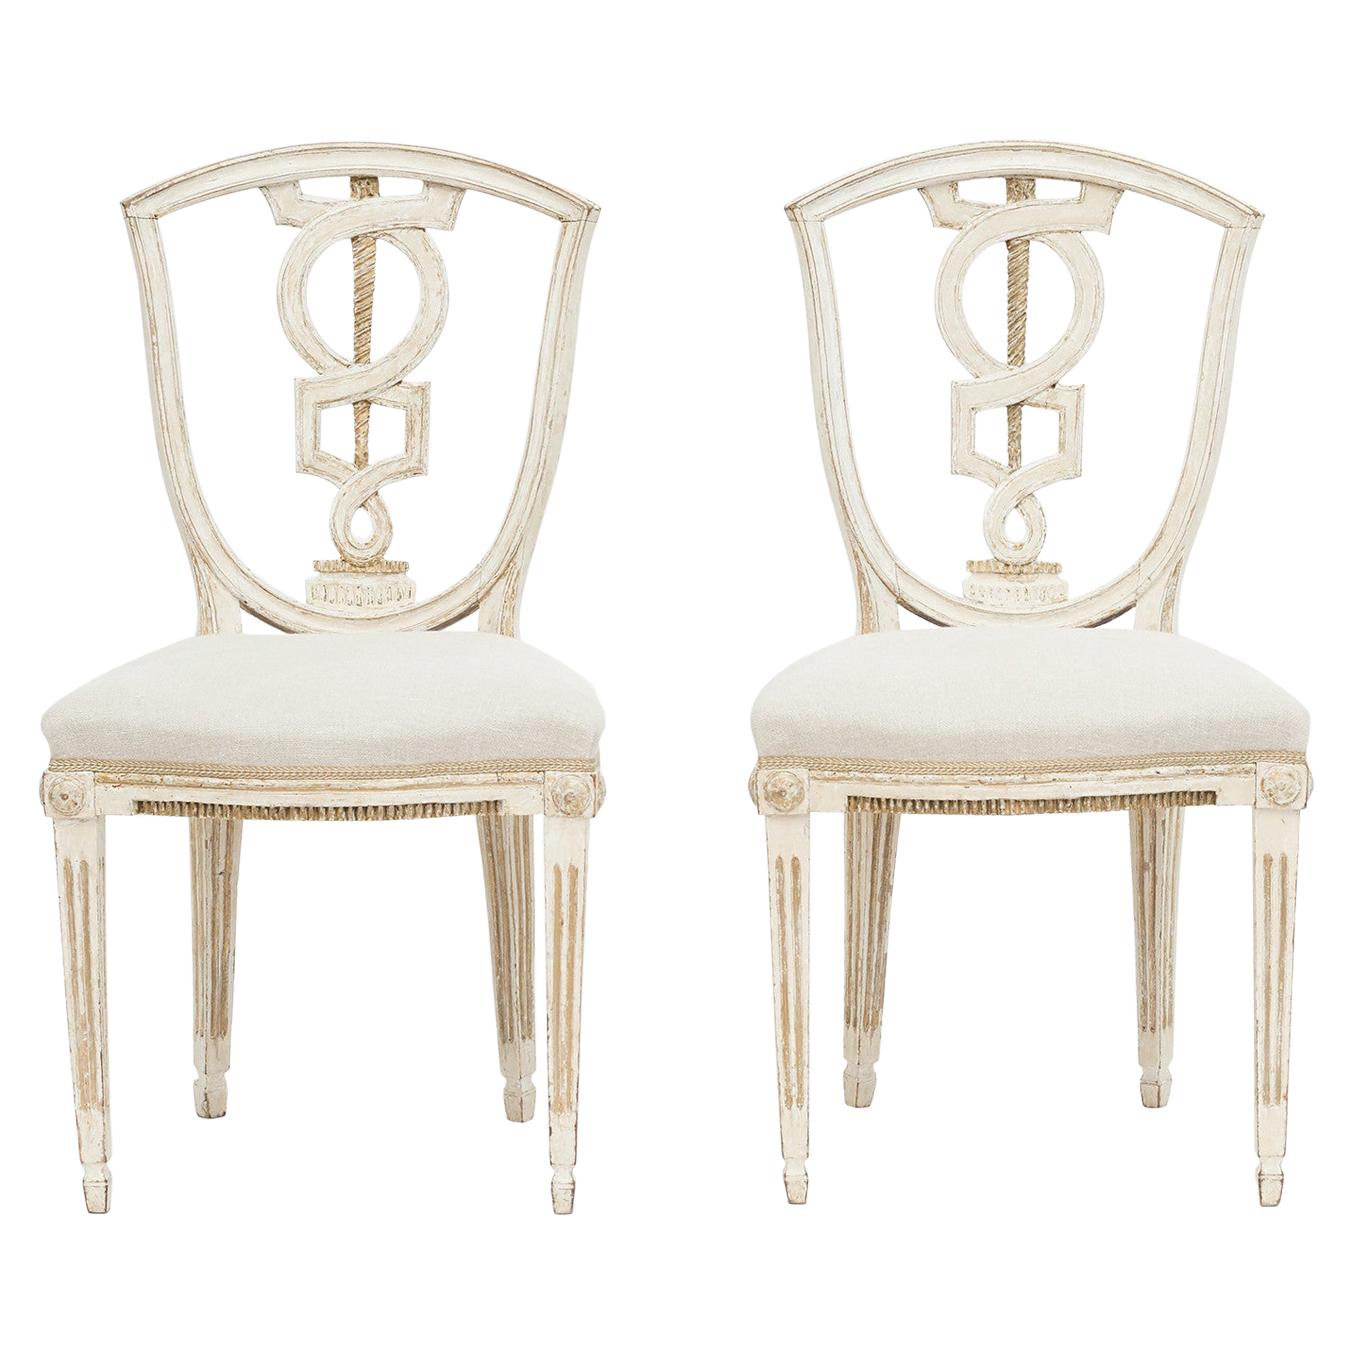 Pair of Danish Louis XVI Chairs in White Painted and Gold Beech